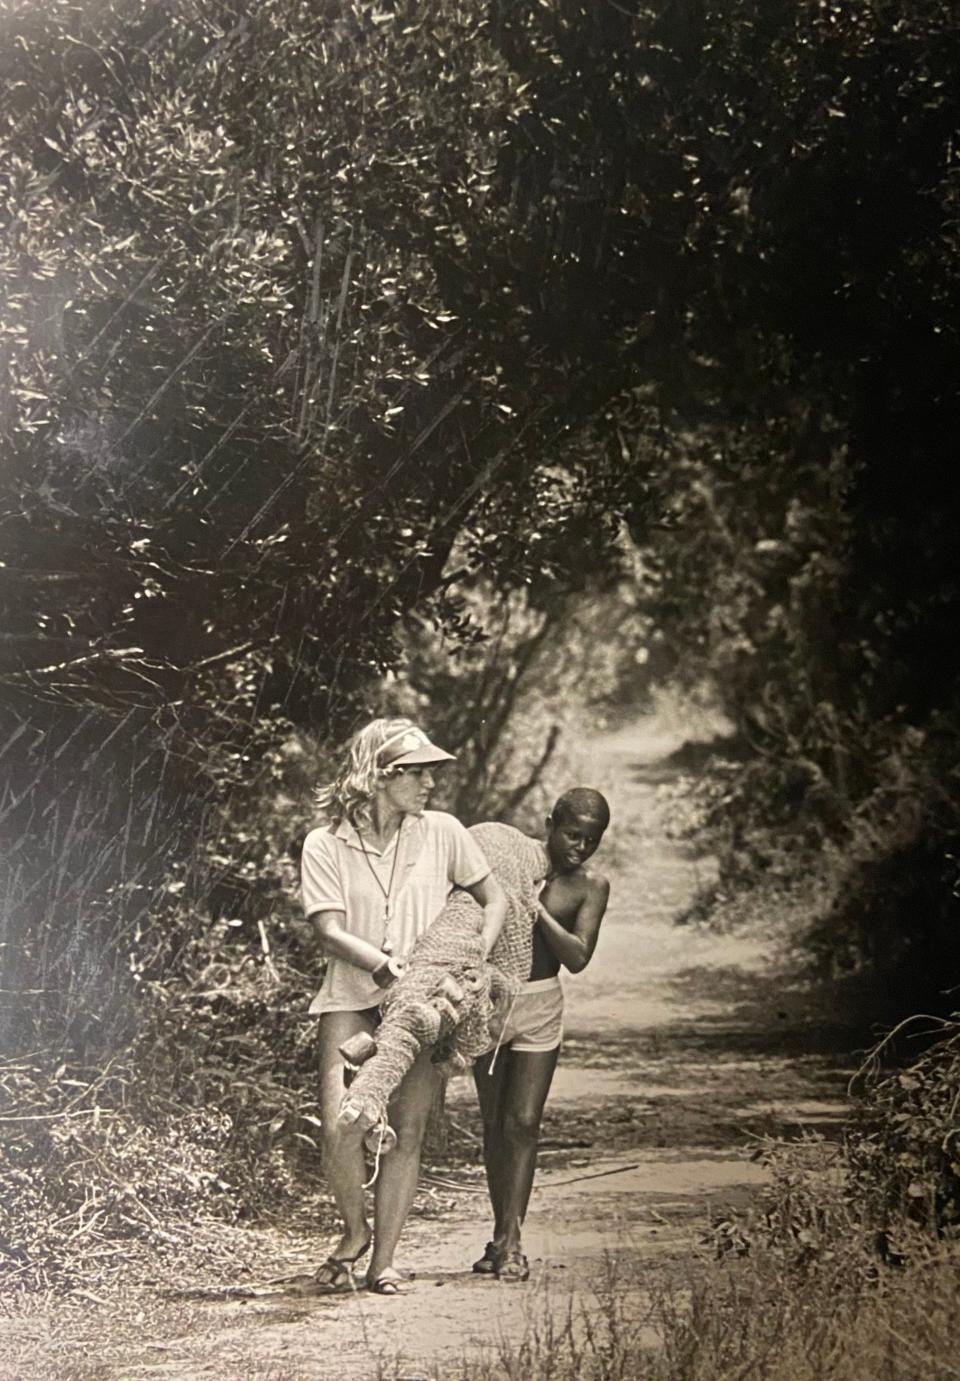 In 1983 Jan Cook, a counselor at a 4-H camp on Jekyll Island, and 12-year-old Juan Webb from Macon, Ga., return from the beach carrying a seine net. They were part of a beachcombing camp on the island.